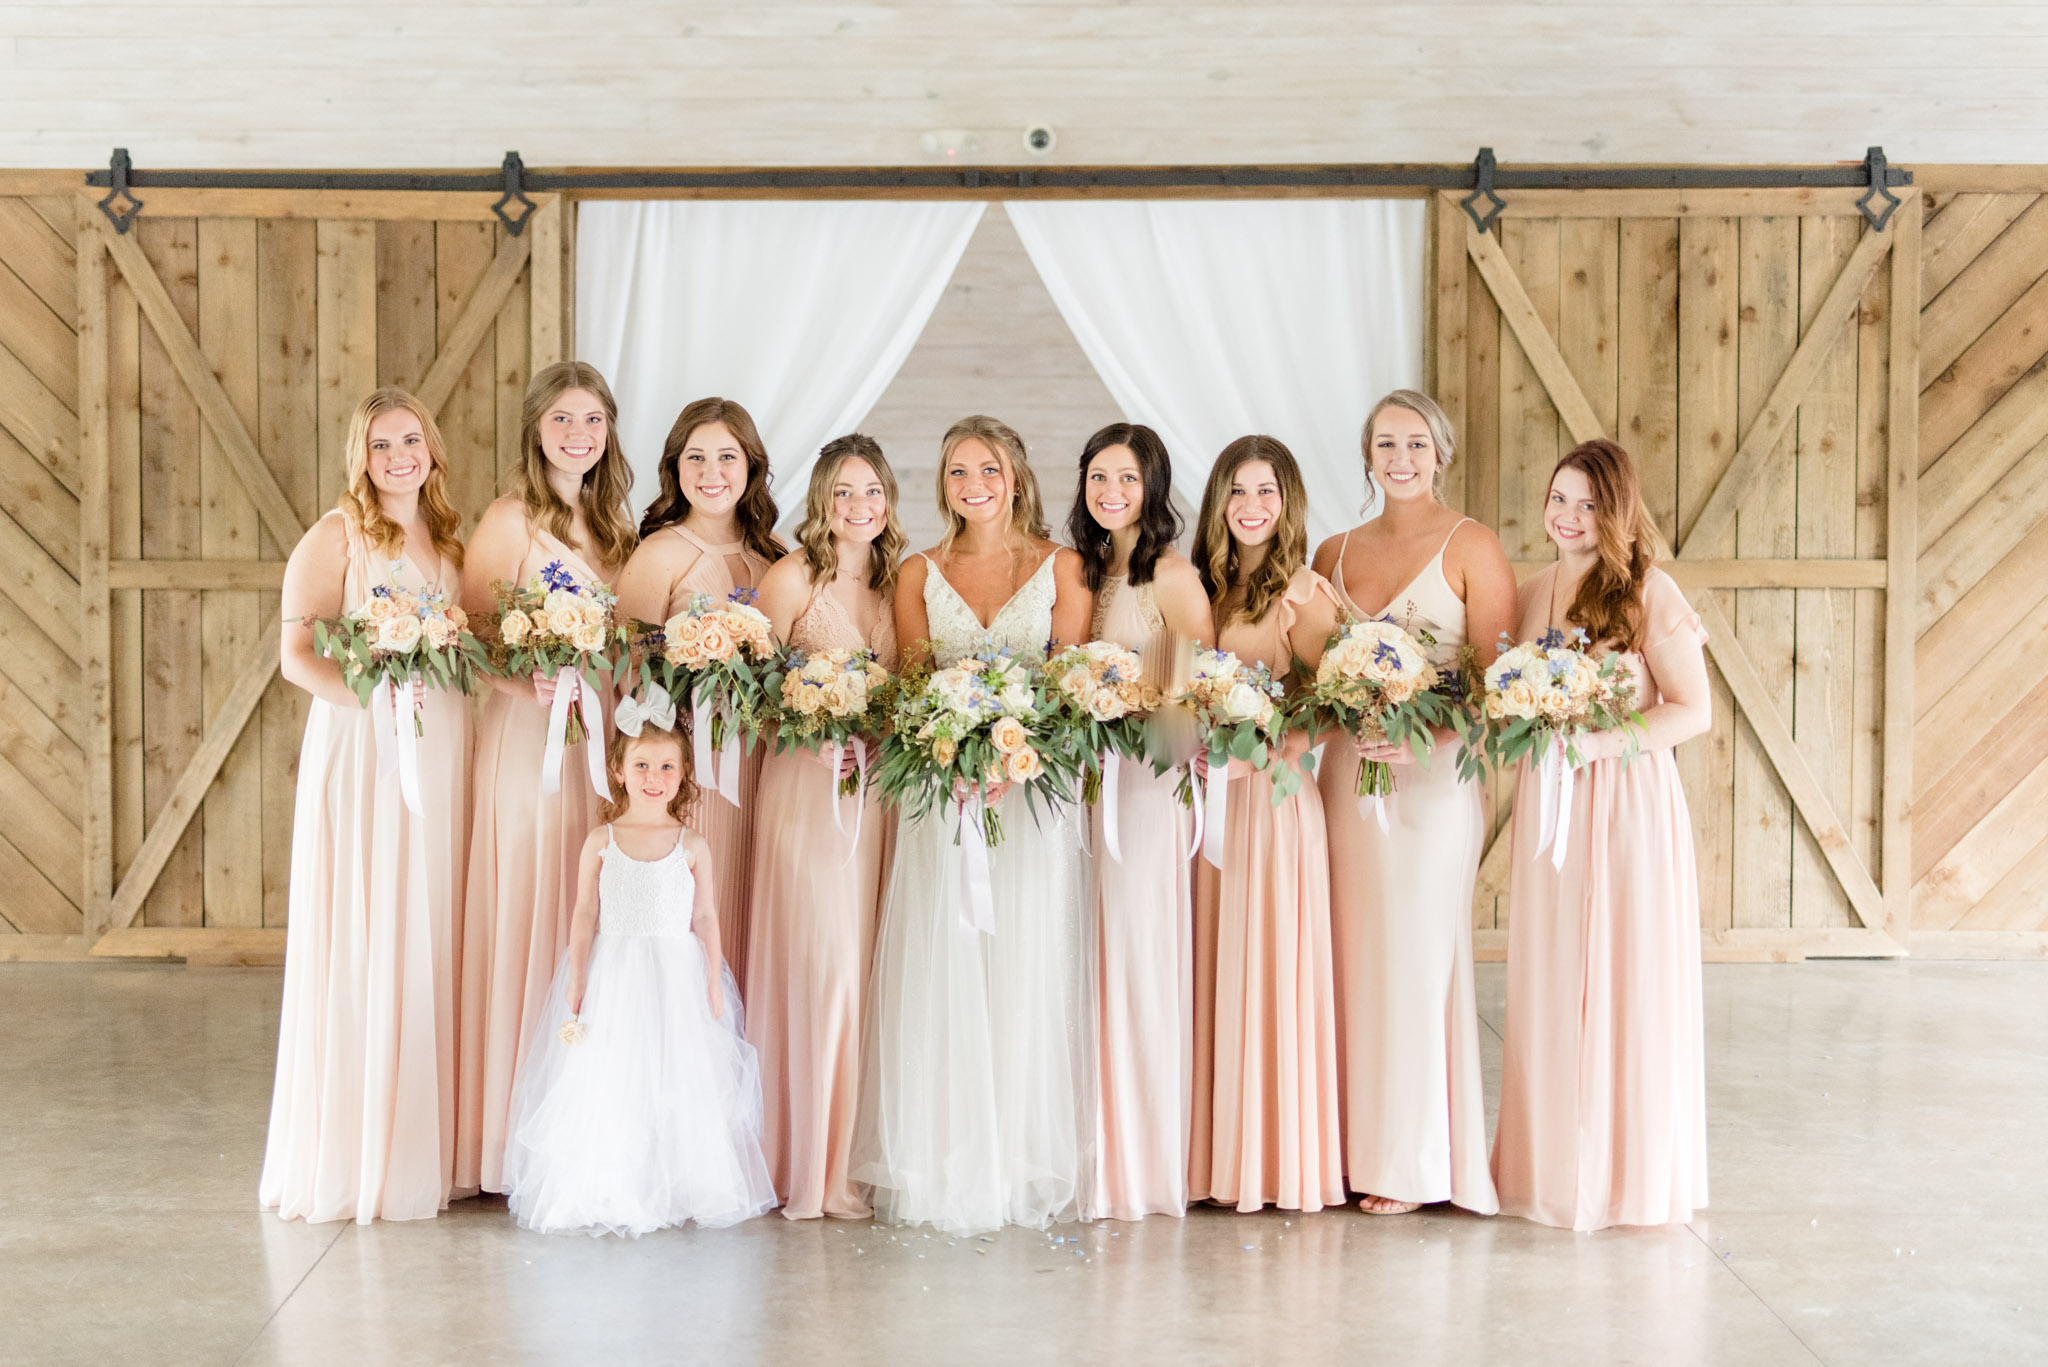 Bride and bridesmaids smile in hall.